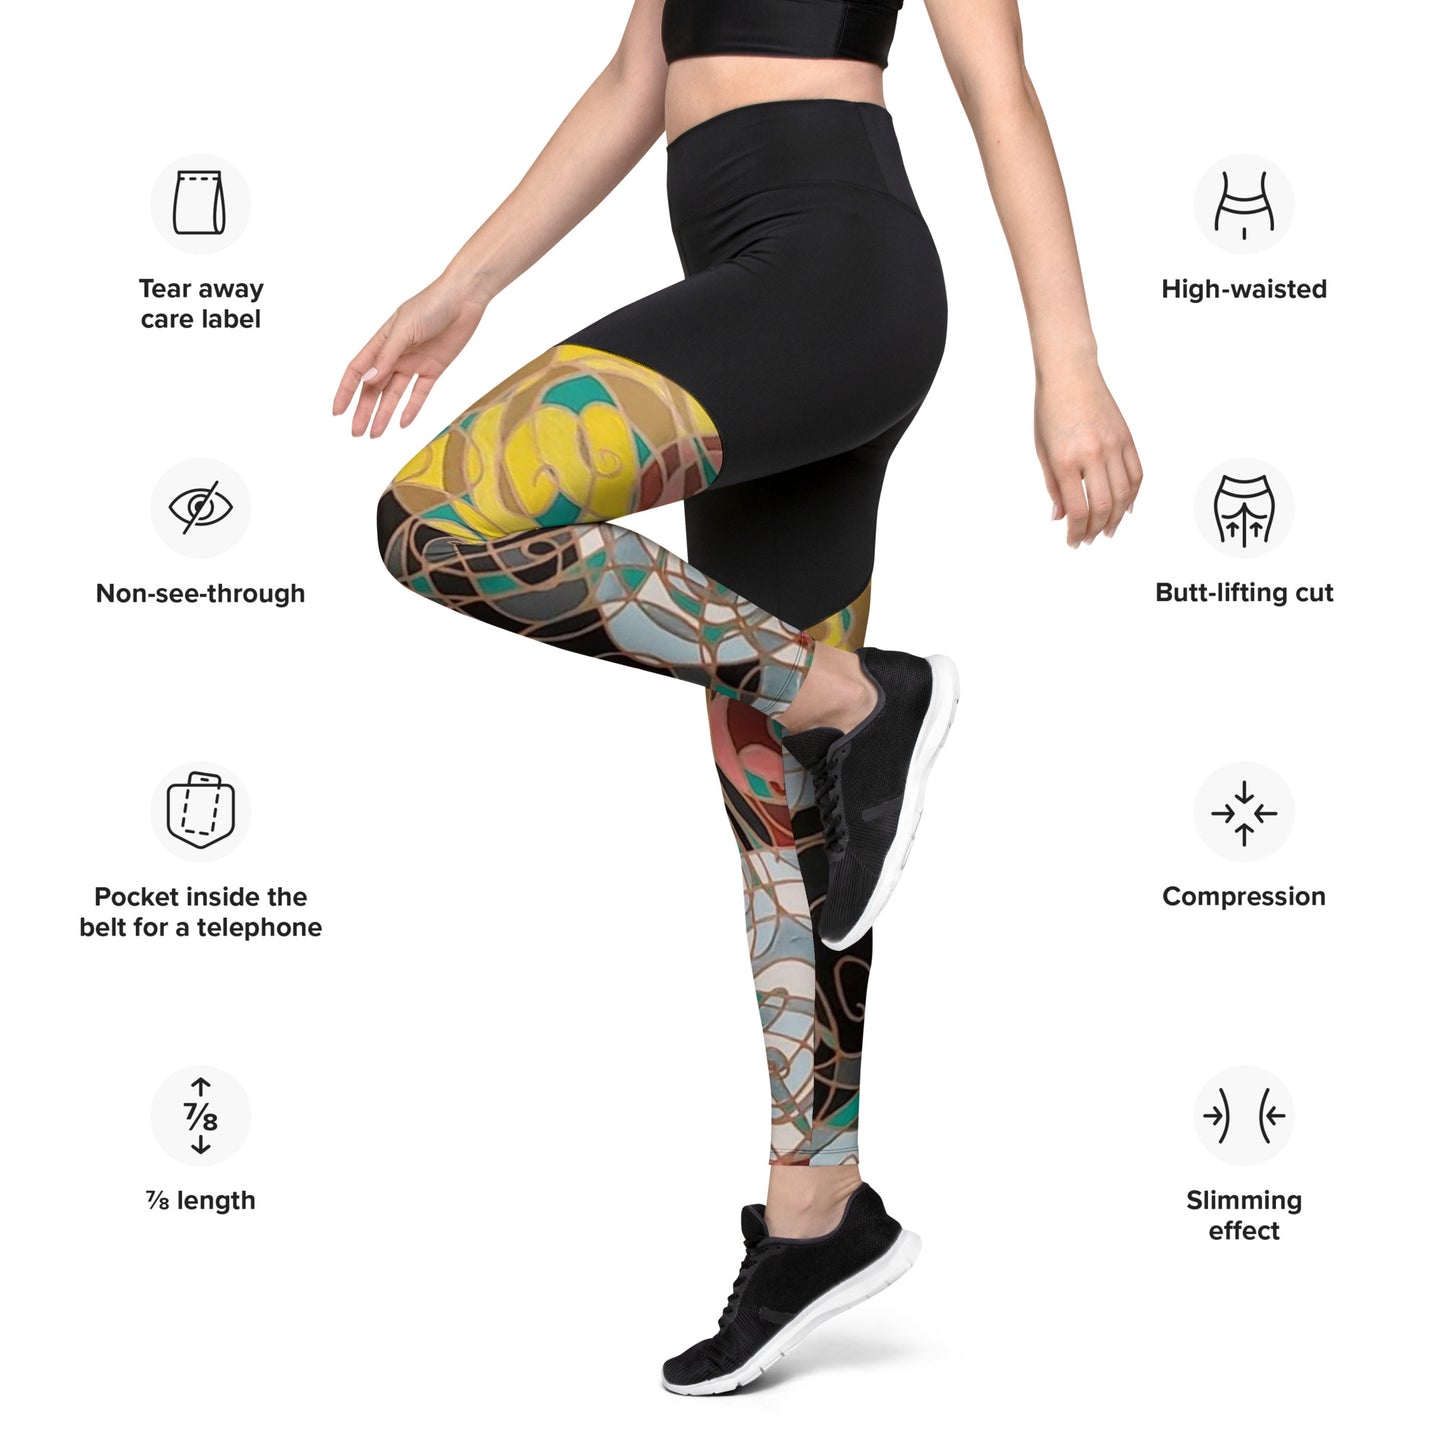 Red and Yellow, Black and White Sports Leggings